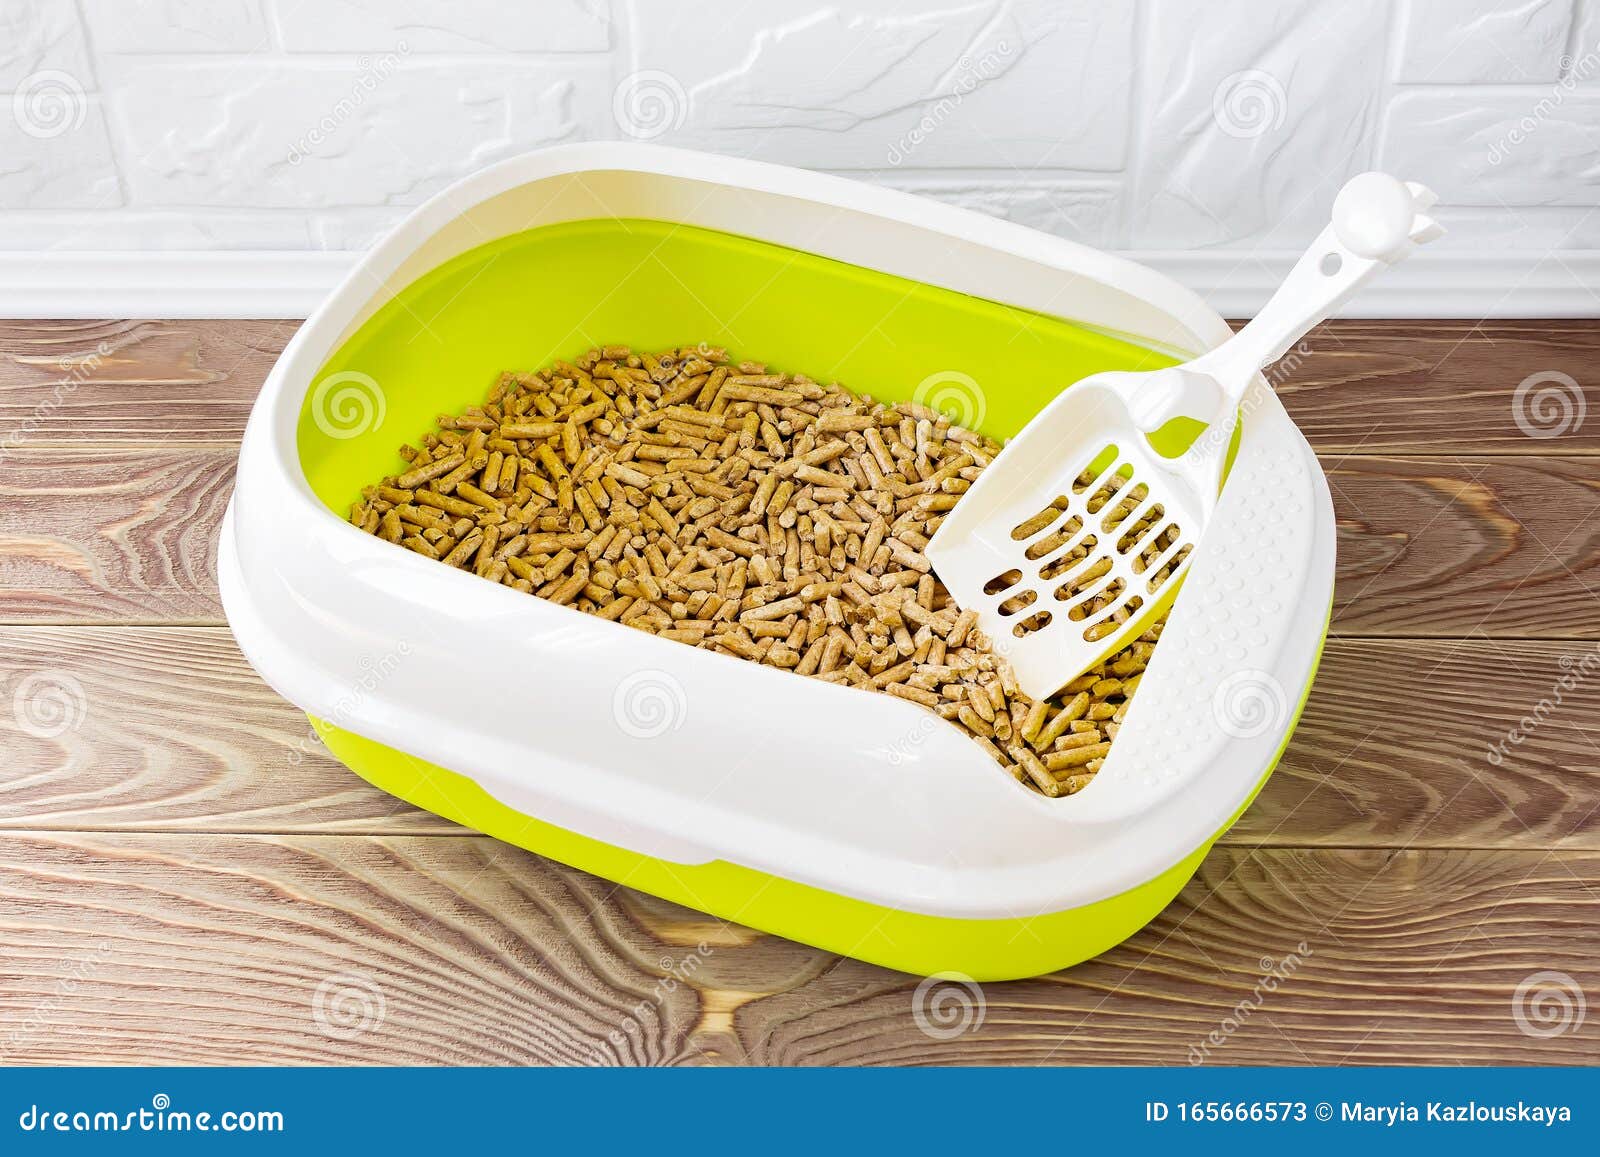 High Sided Cat Litter Tray With Wooden Pellets And Scoop On A Brown